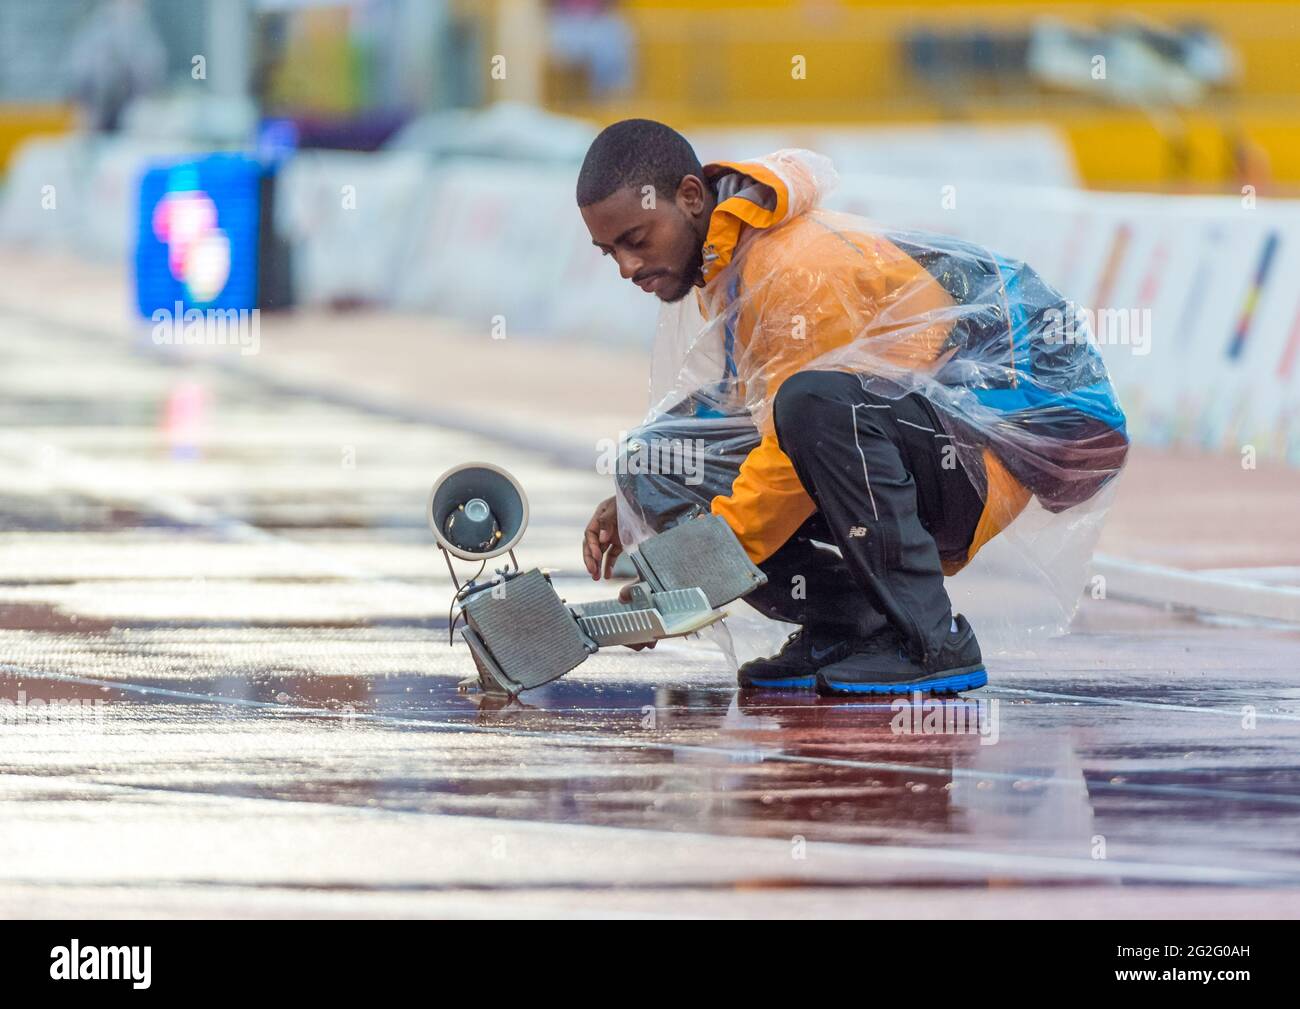 Volunteer fixing the starting blocks on a wet running track at the 2015 Parapan American Games. Starting blocks are a device used by sprint athletes t Stock Photo